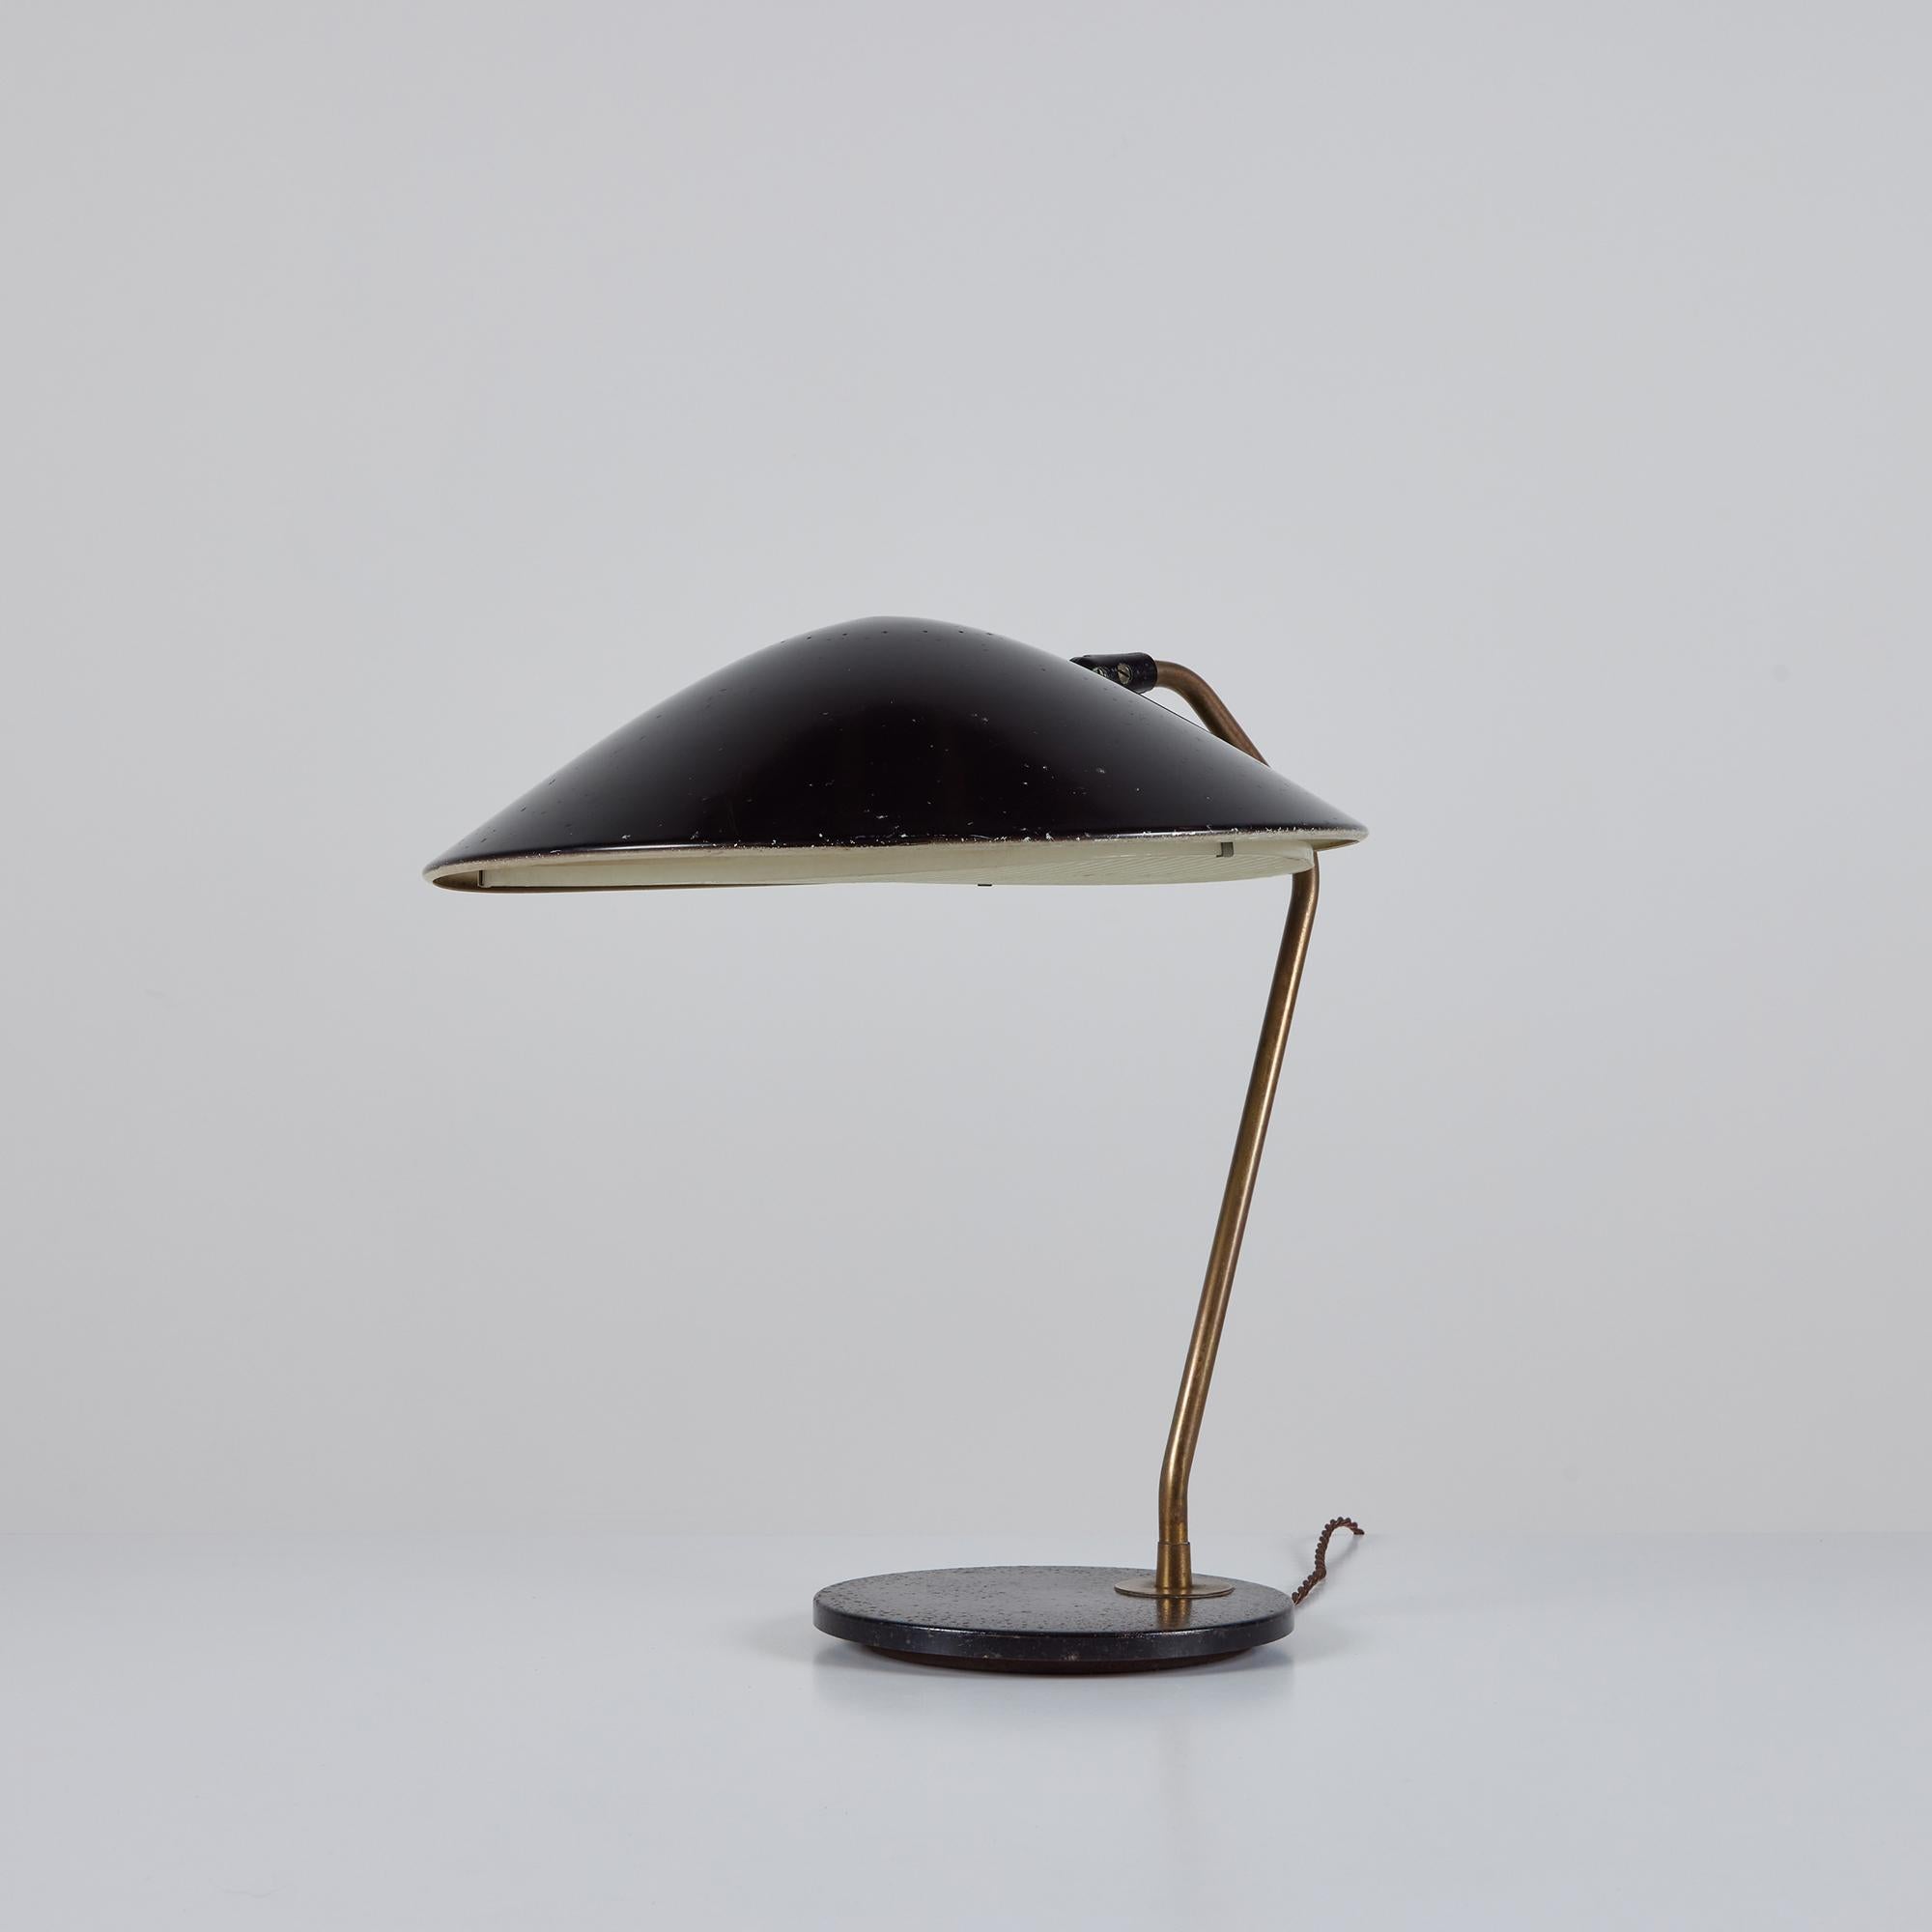 Gerald Thurston desk or table lamp for Lightolier, c.1950s, USA. The lamp features a black enamel dome aluminum shade. The shade has a round perforated detailing at the top and a translucent light diffuser at the bottom of the shade. A curved brass